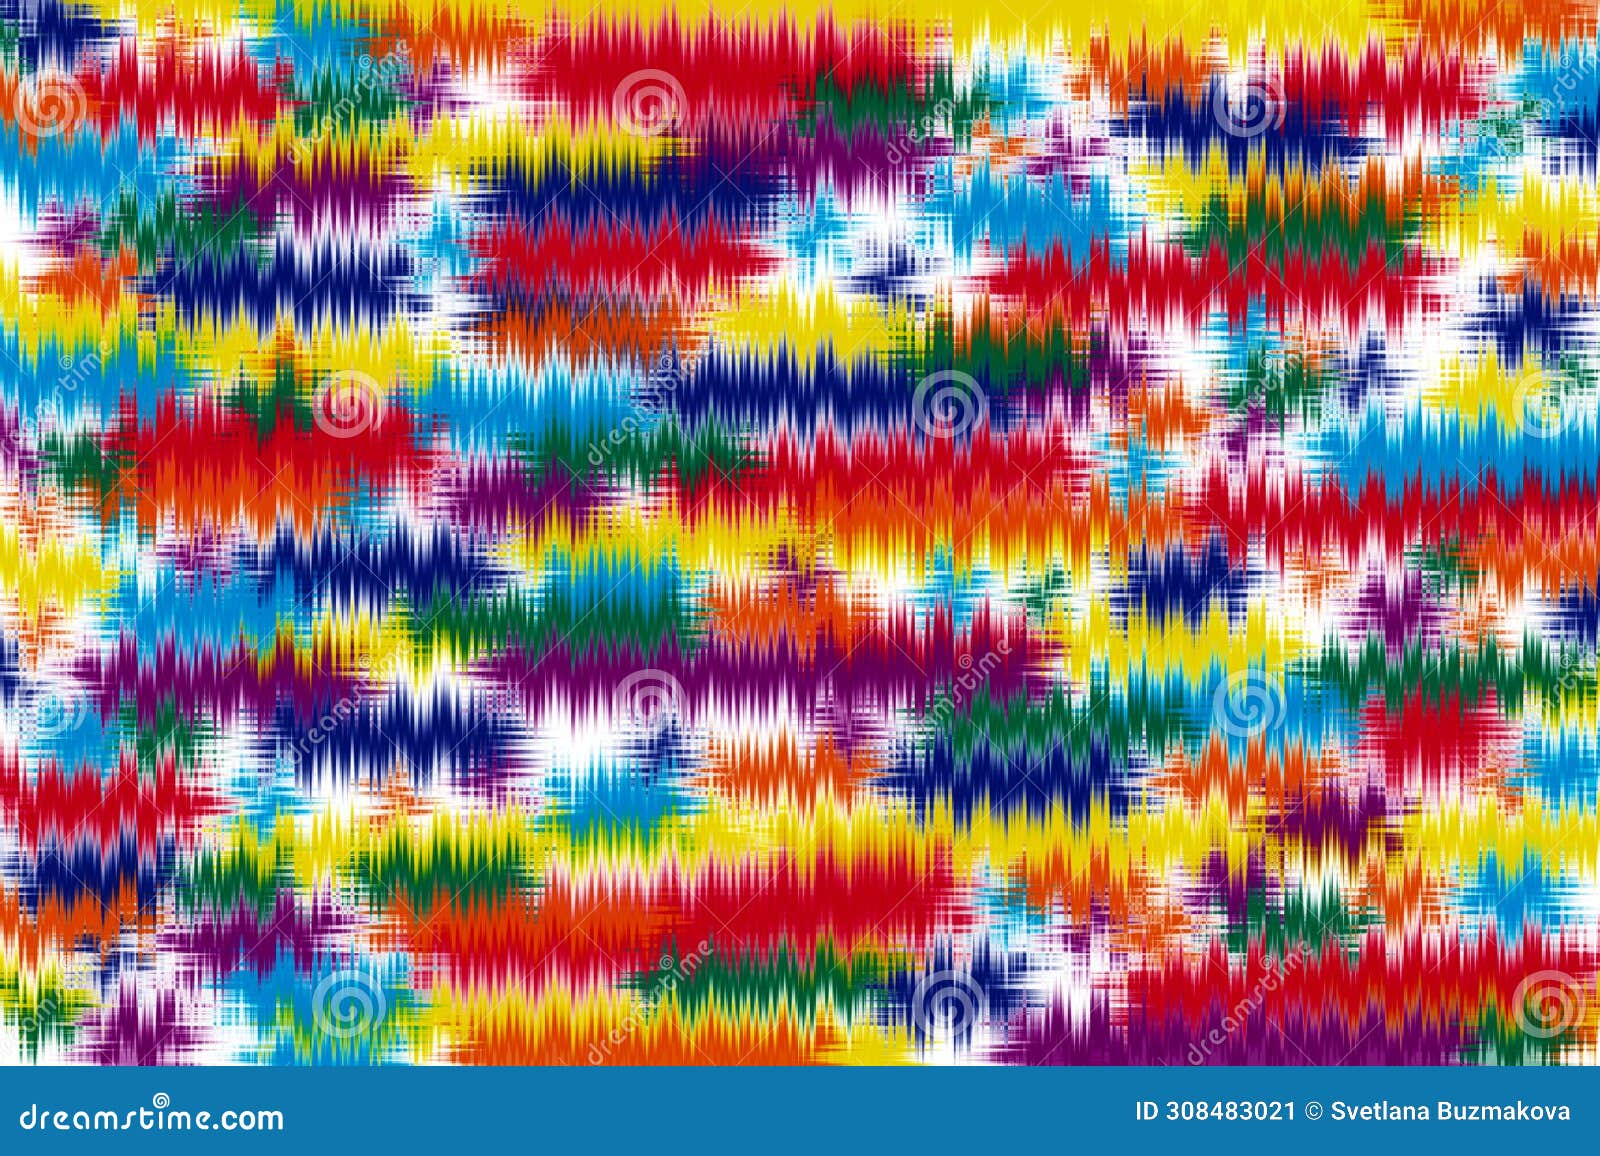 colorful horizontal zigzags fill the background. abstract bright texture with zigzags.